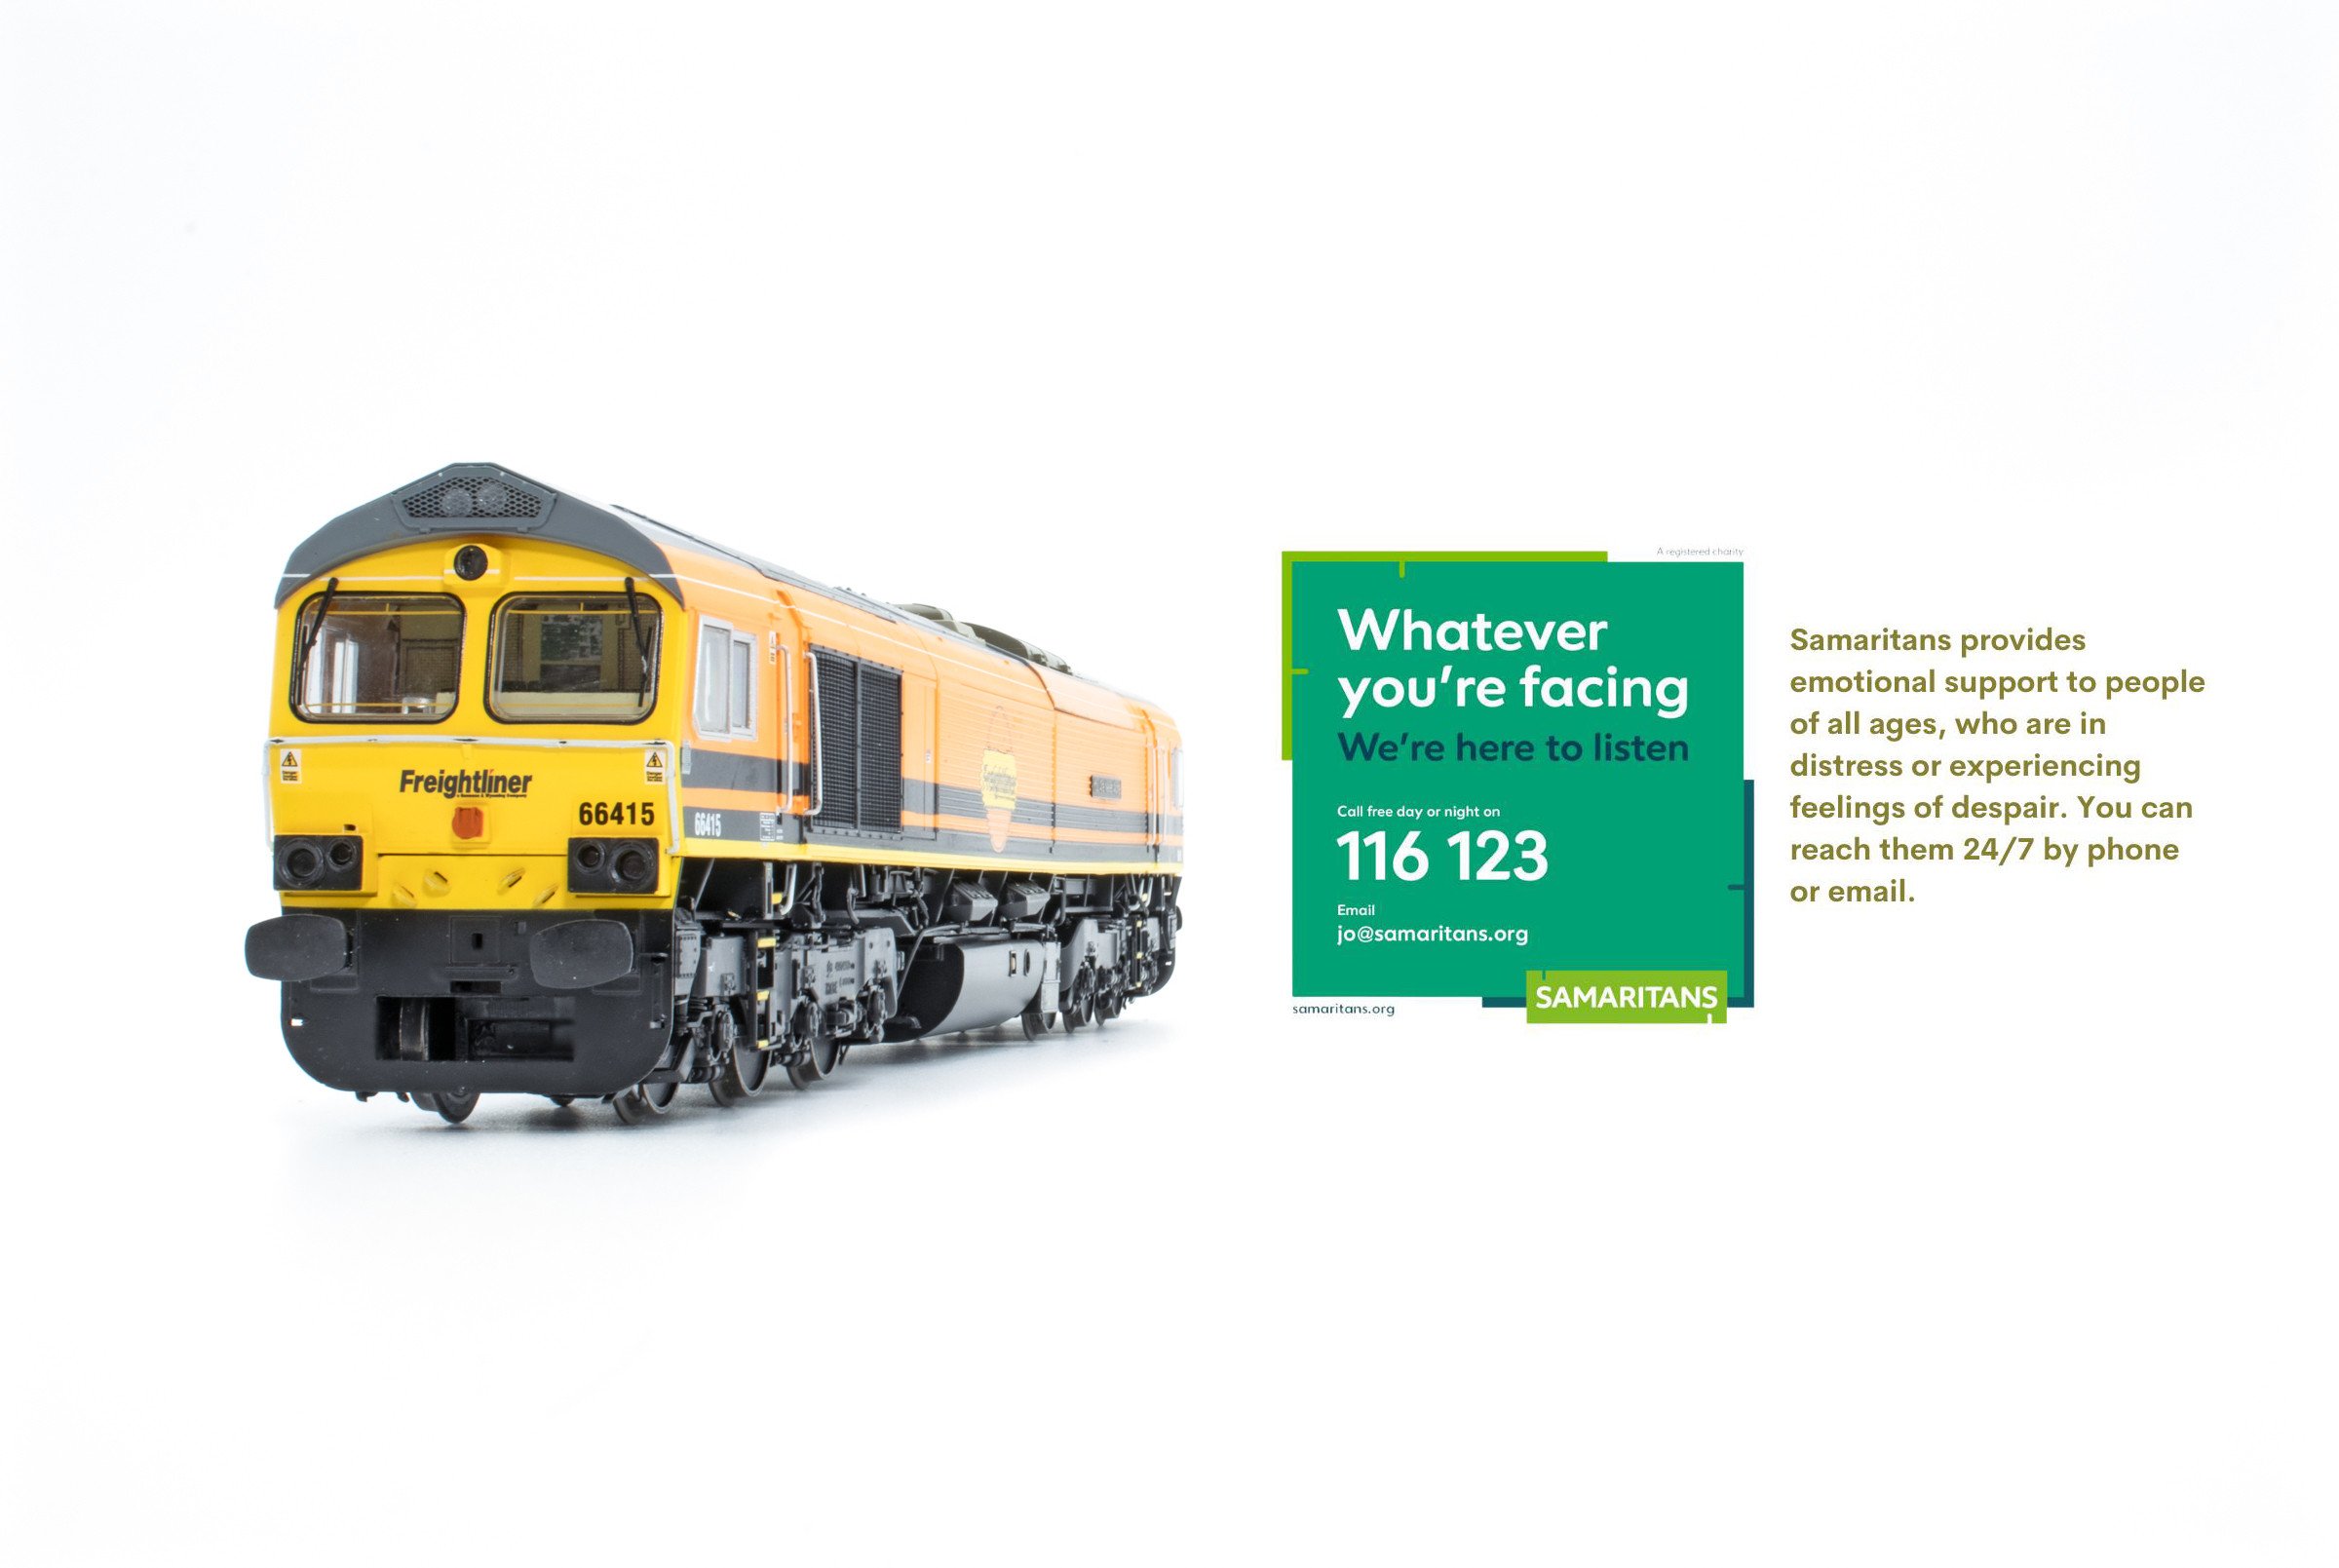 This exclusive model aims to raise money for the Samaritans charity.